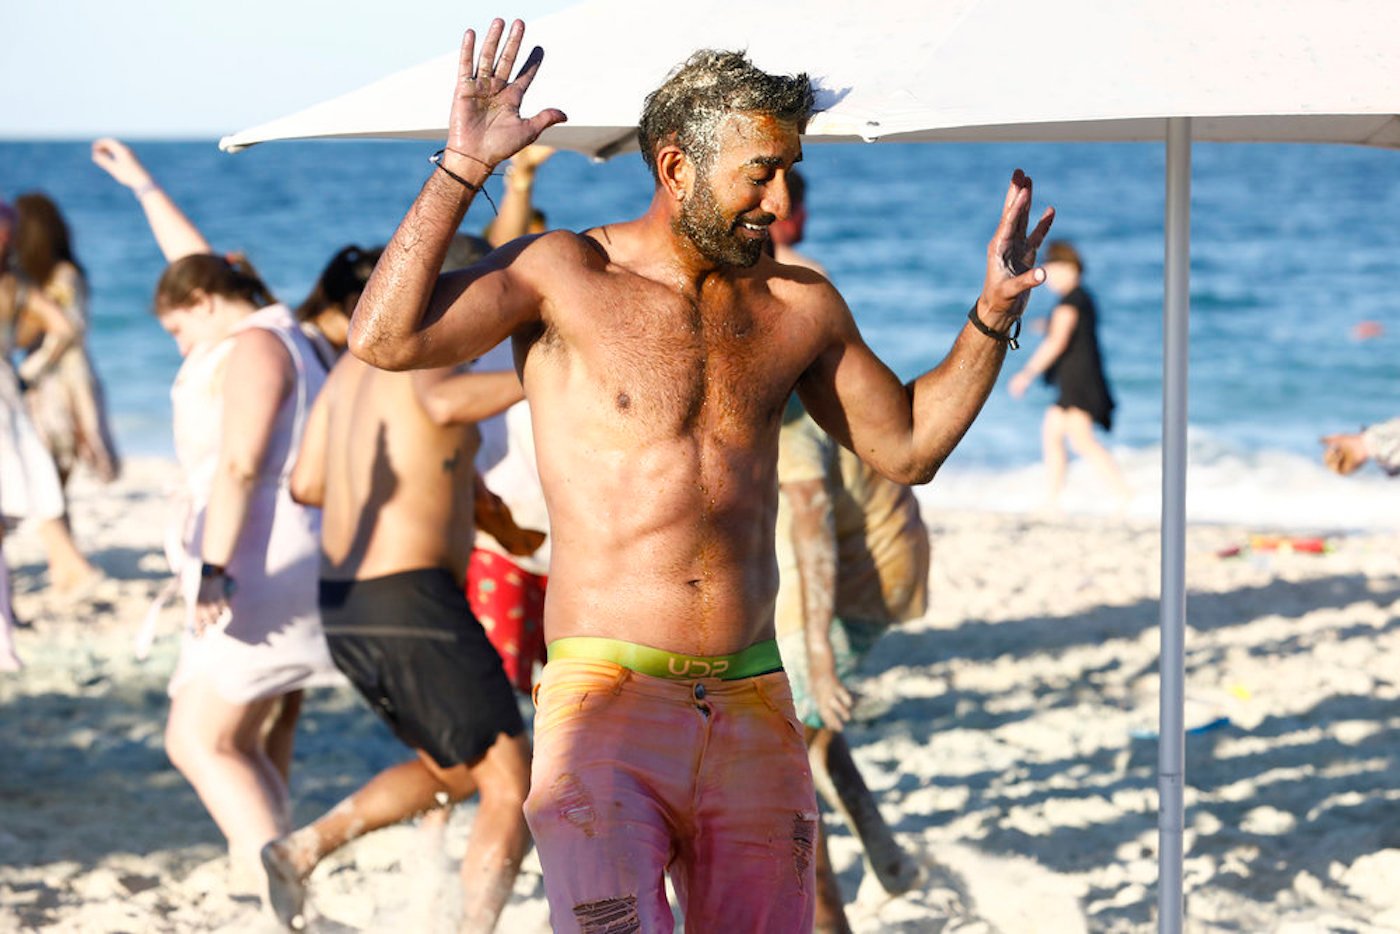 Vishal Parvani from 'Family Karma' dances on the beach with sand in his hair